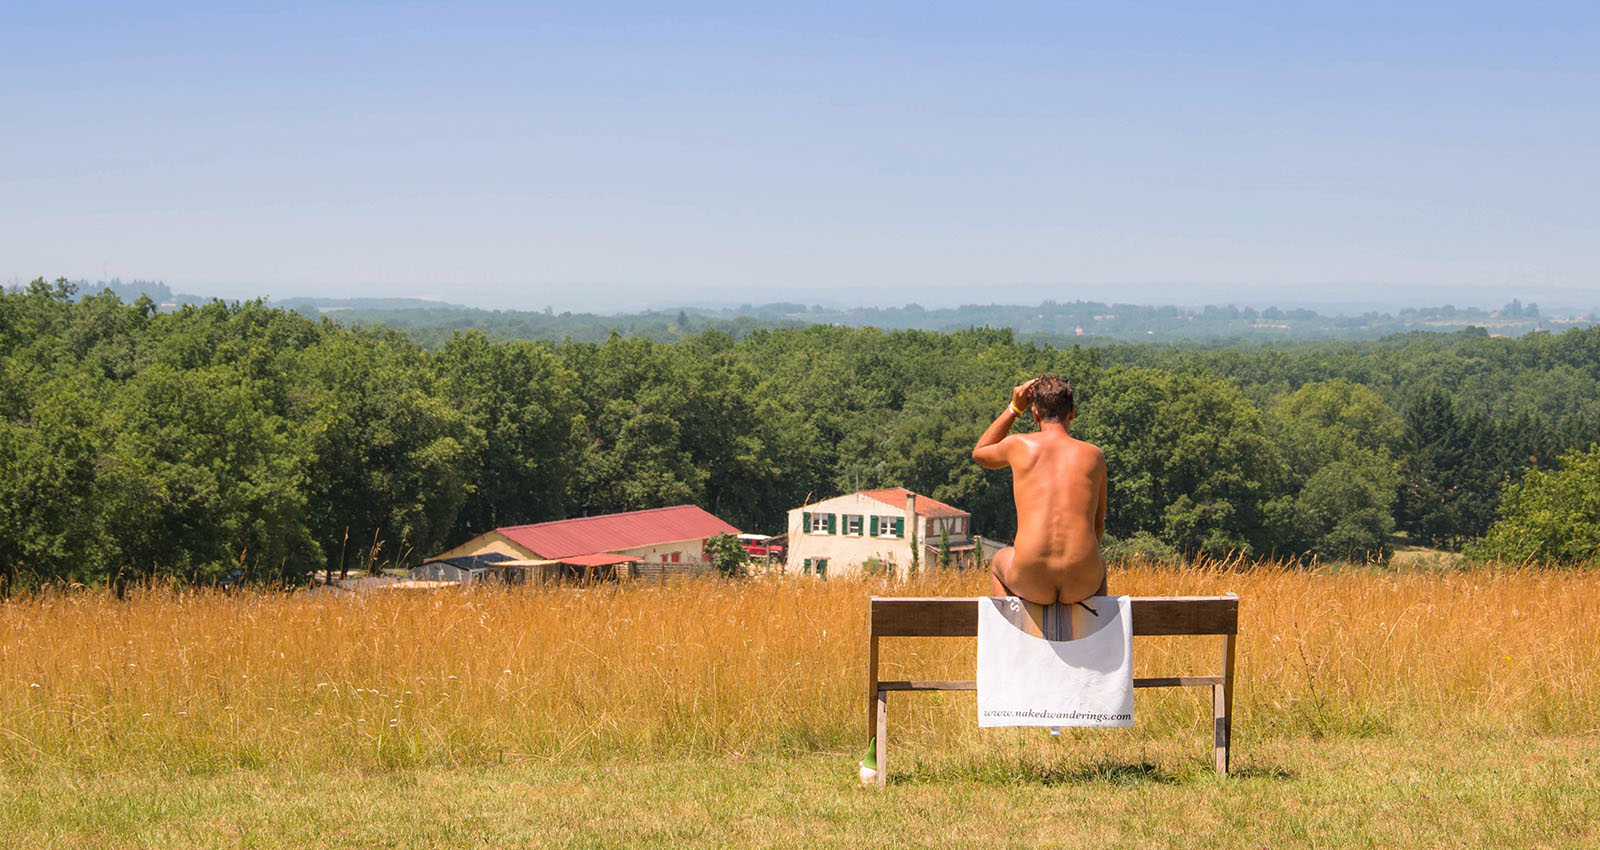 5 Reasons to Return to Naturism